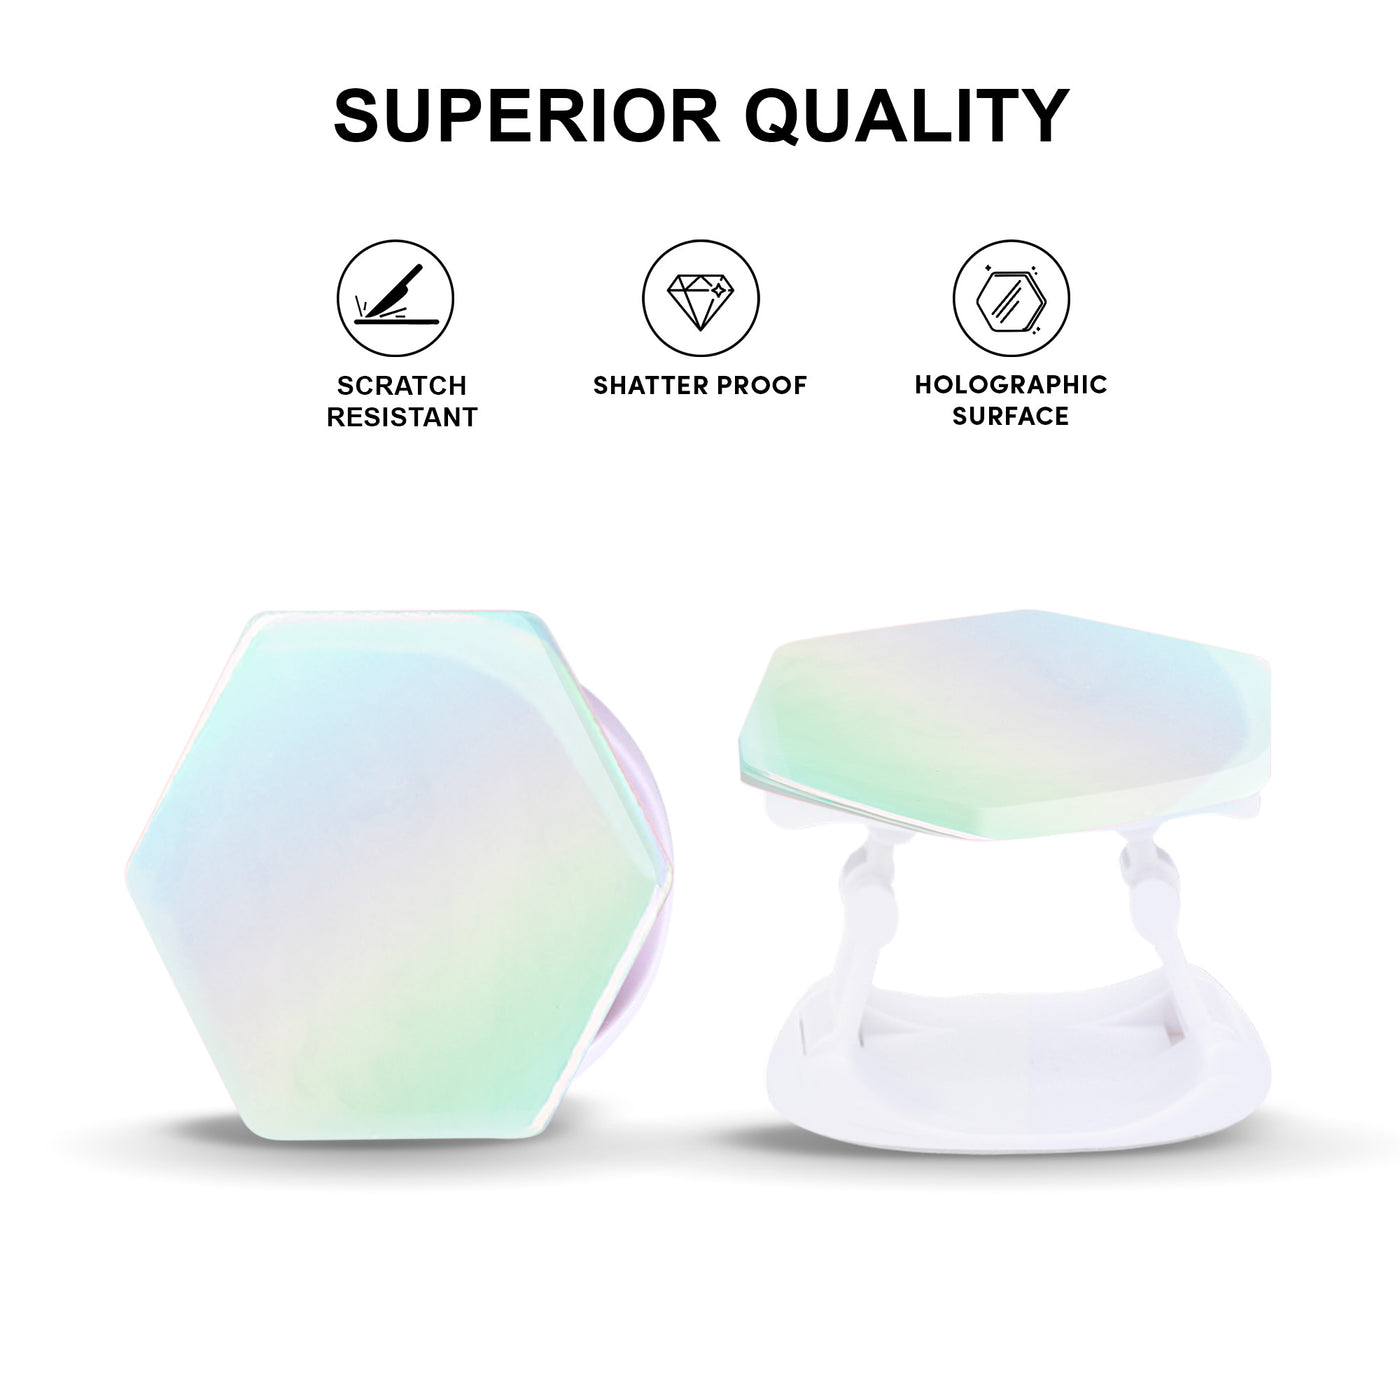 Quartz Holographic Phone Grip and Stand